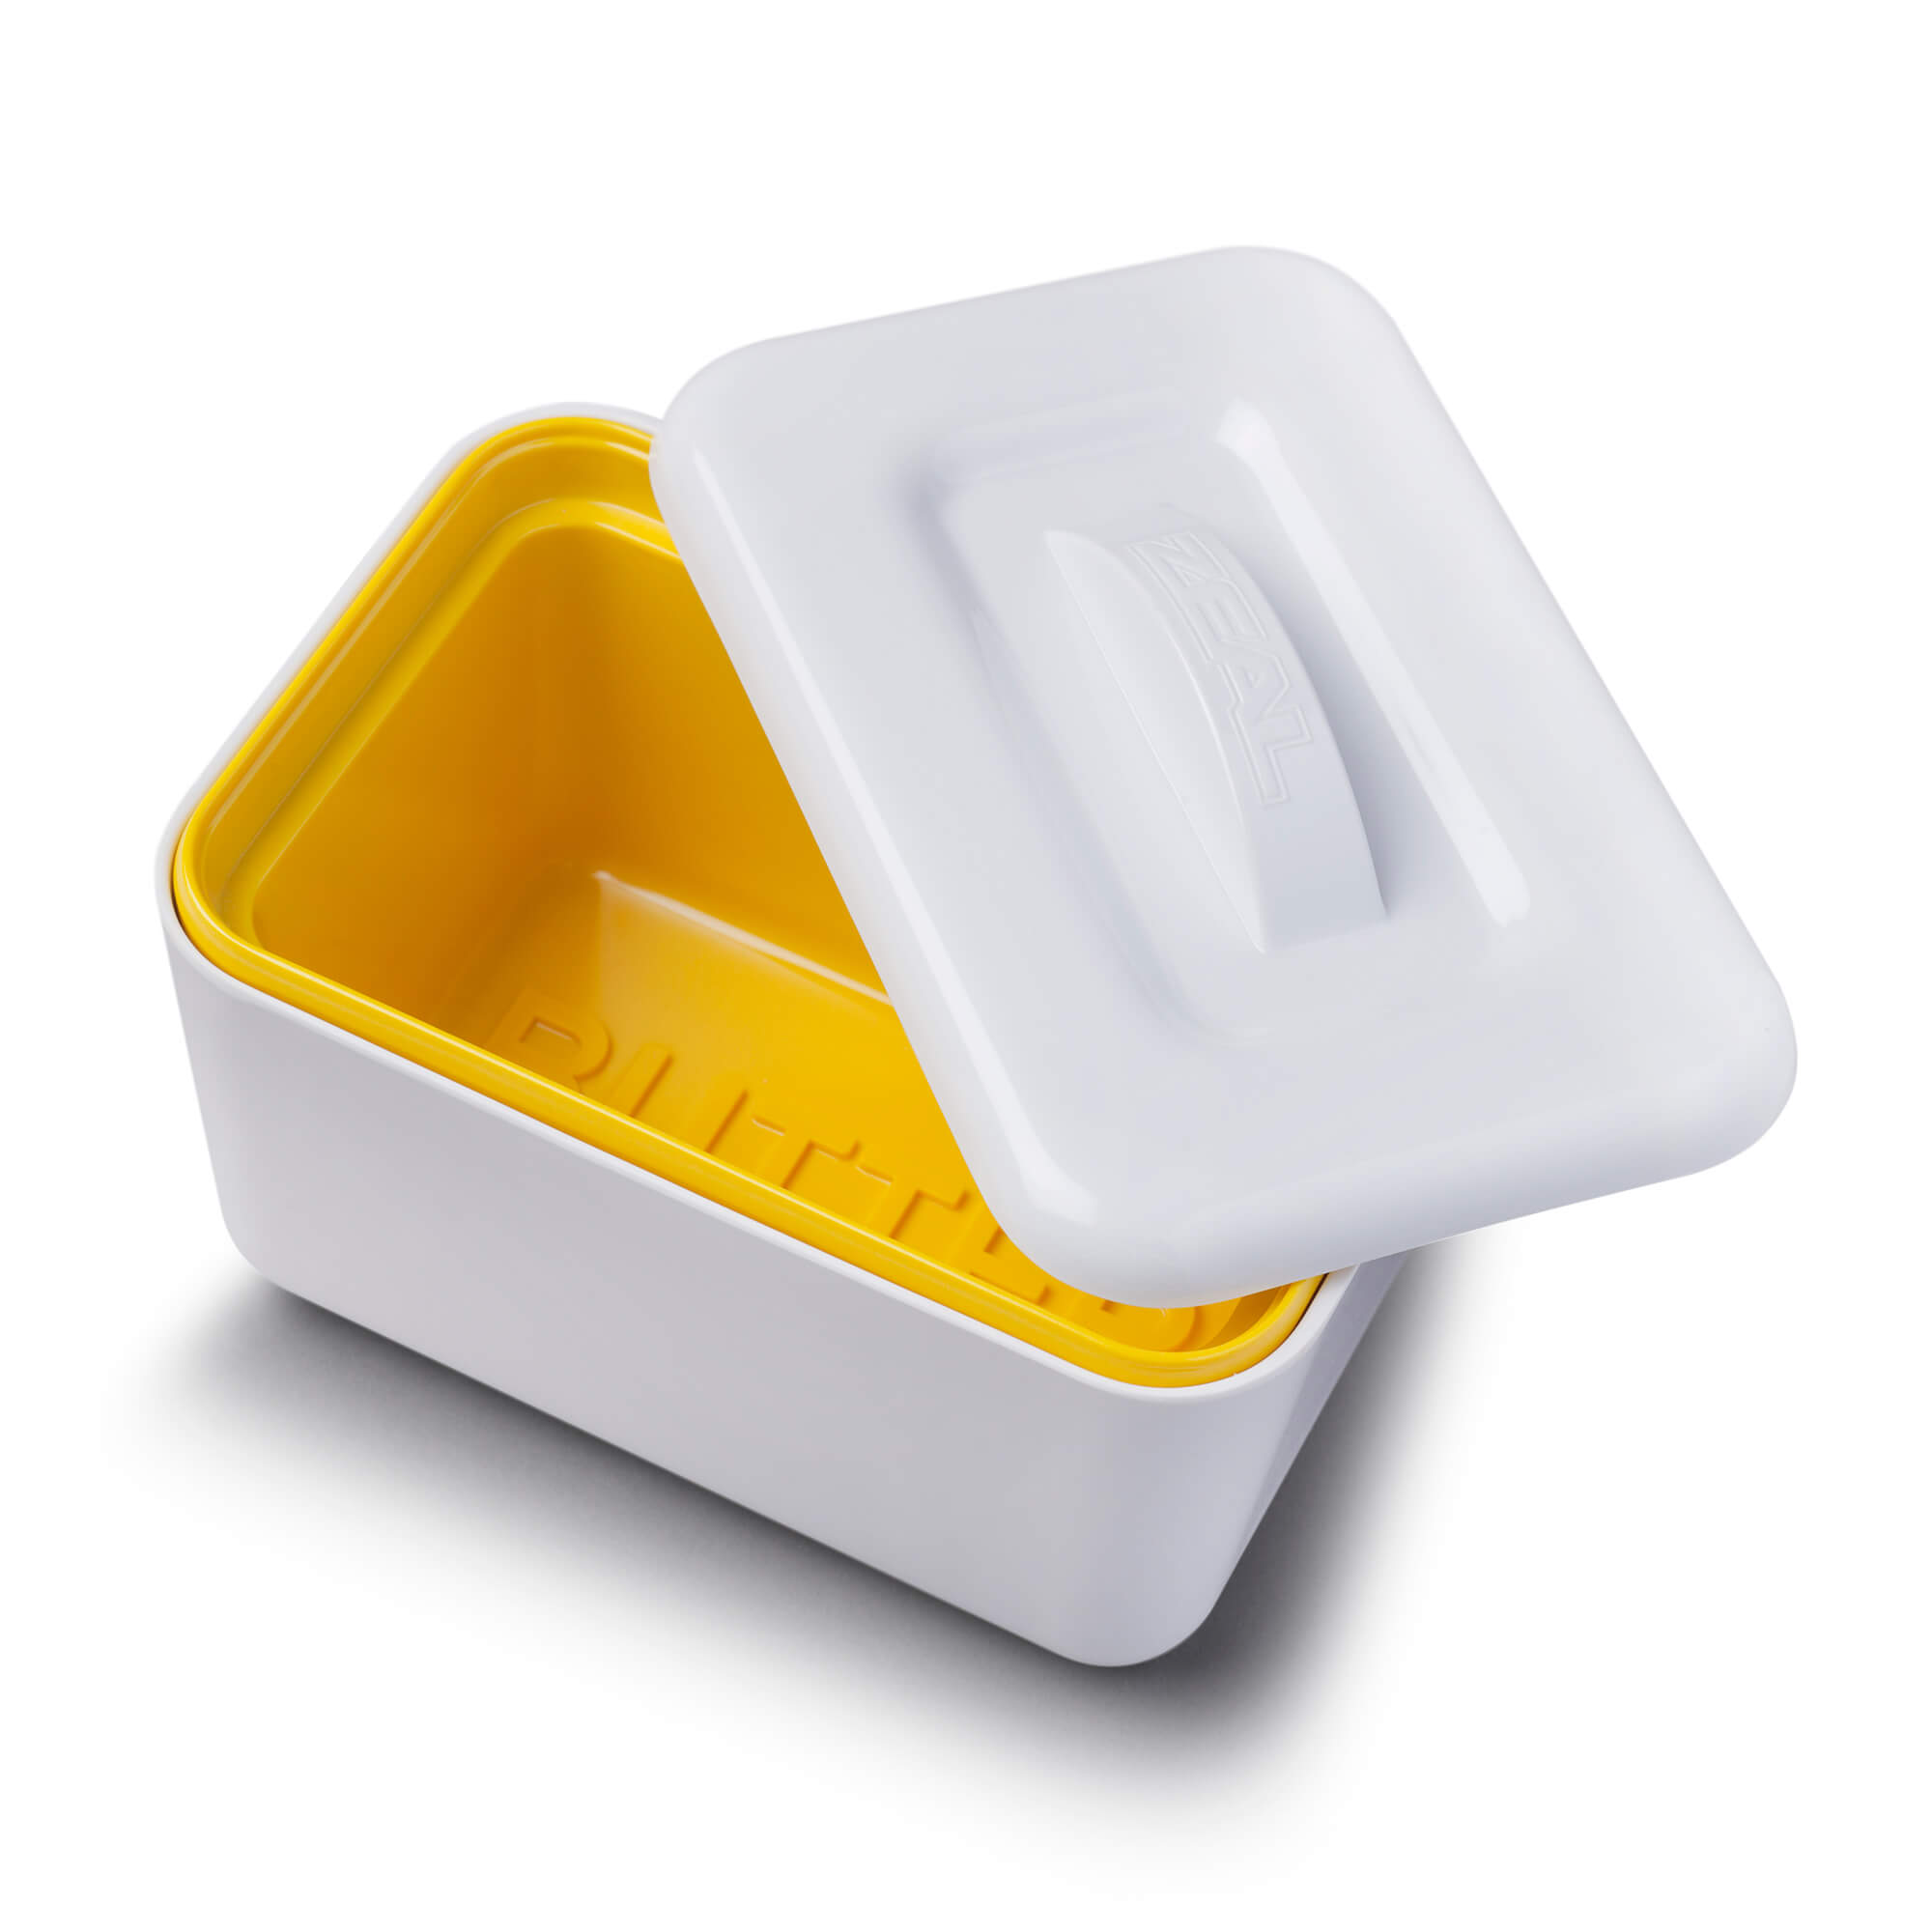 Inside of White Melamine Butter Dish by Zeal